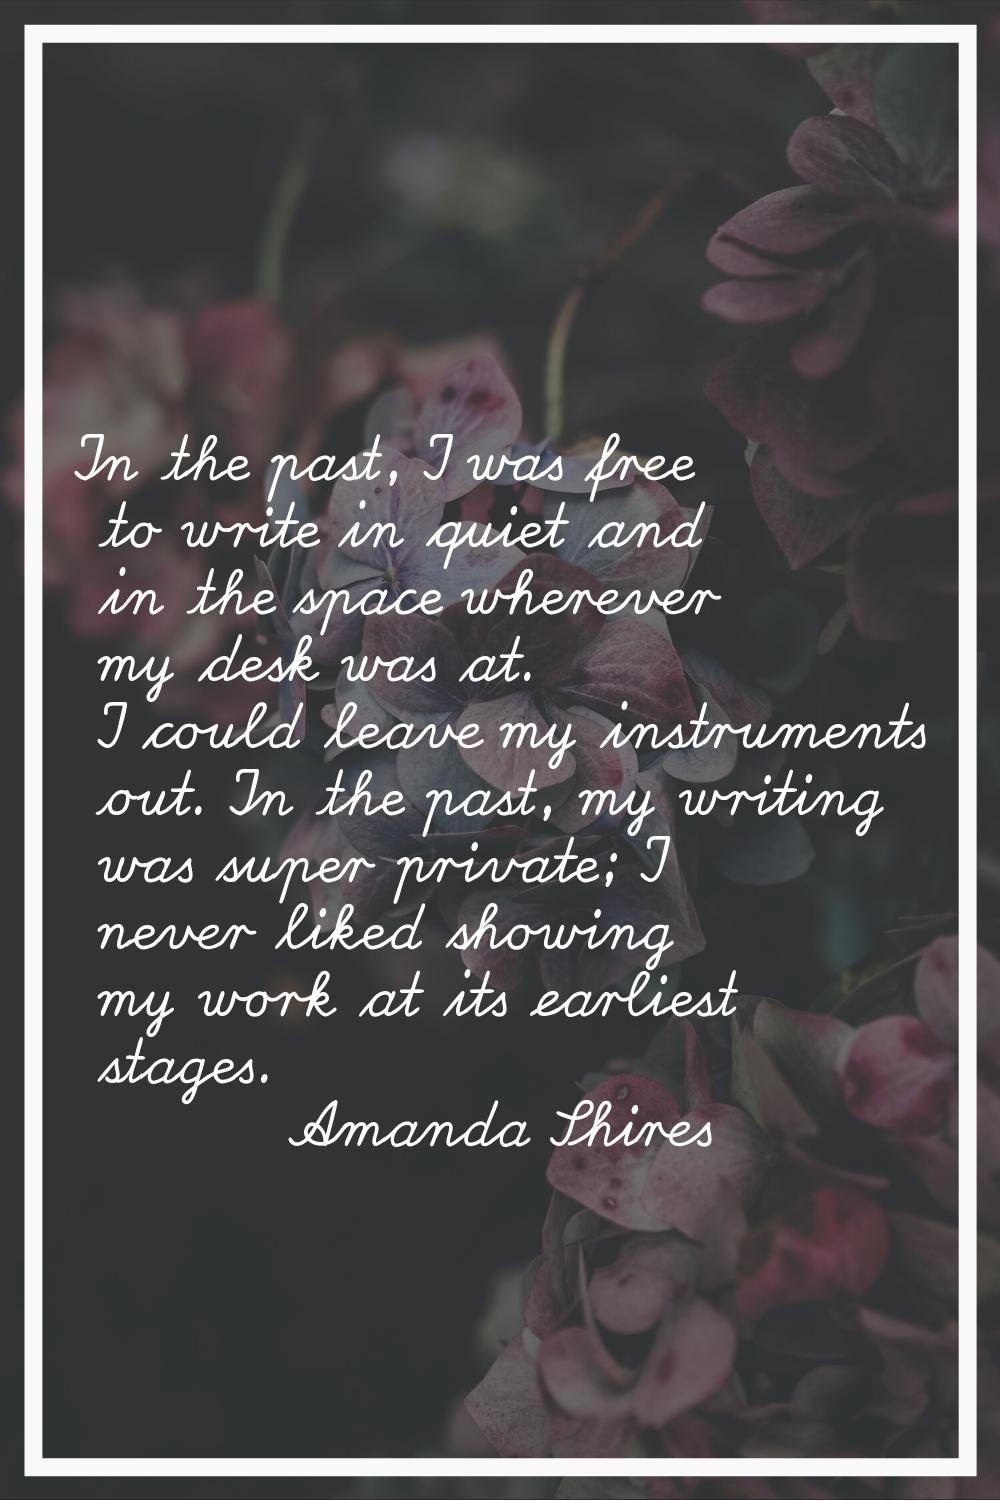 In the past, I was free to write in quiet and in the space wherever my desk was at. I could leave m